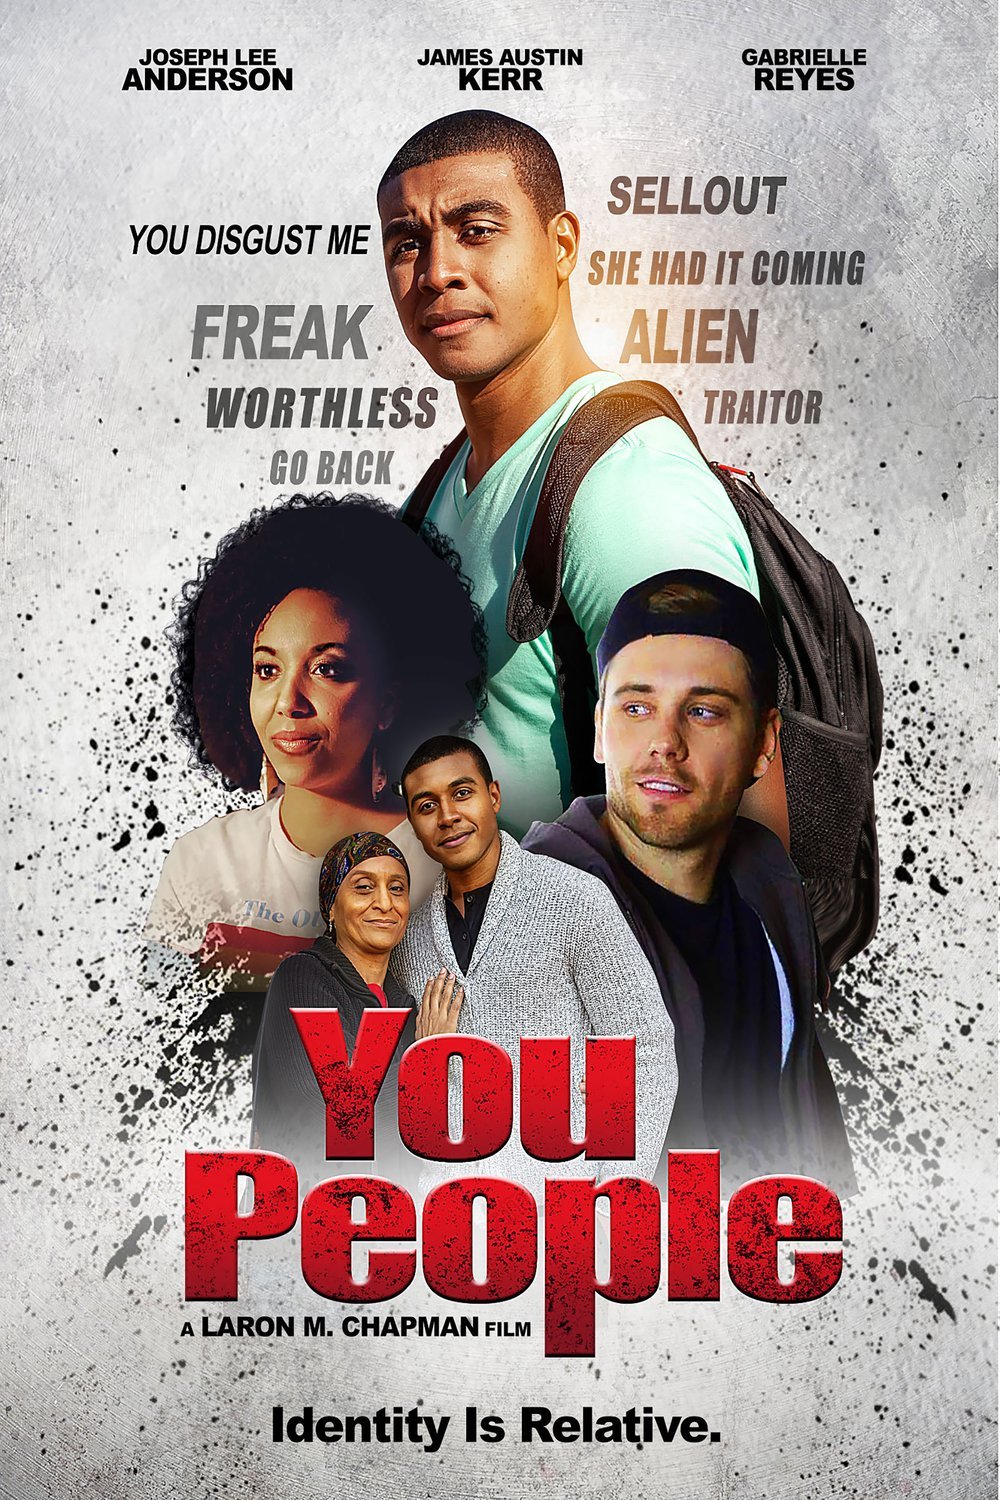 Poster of the movie You People